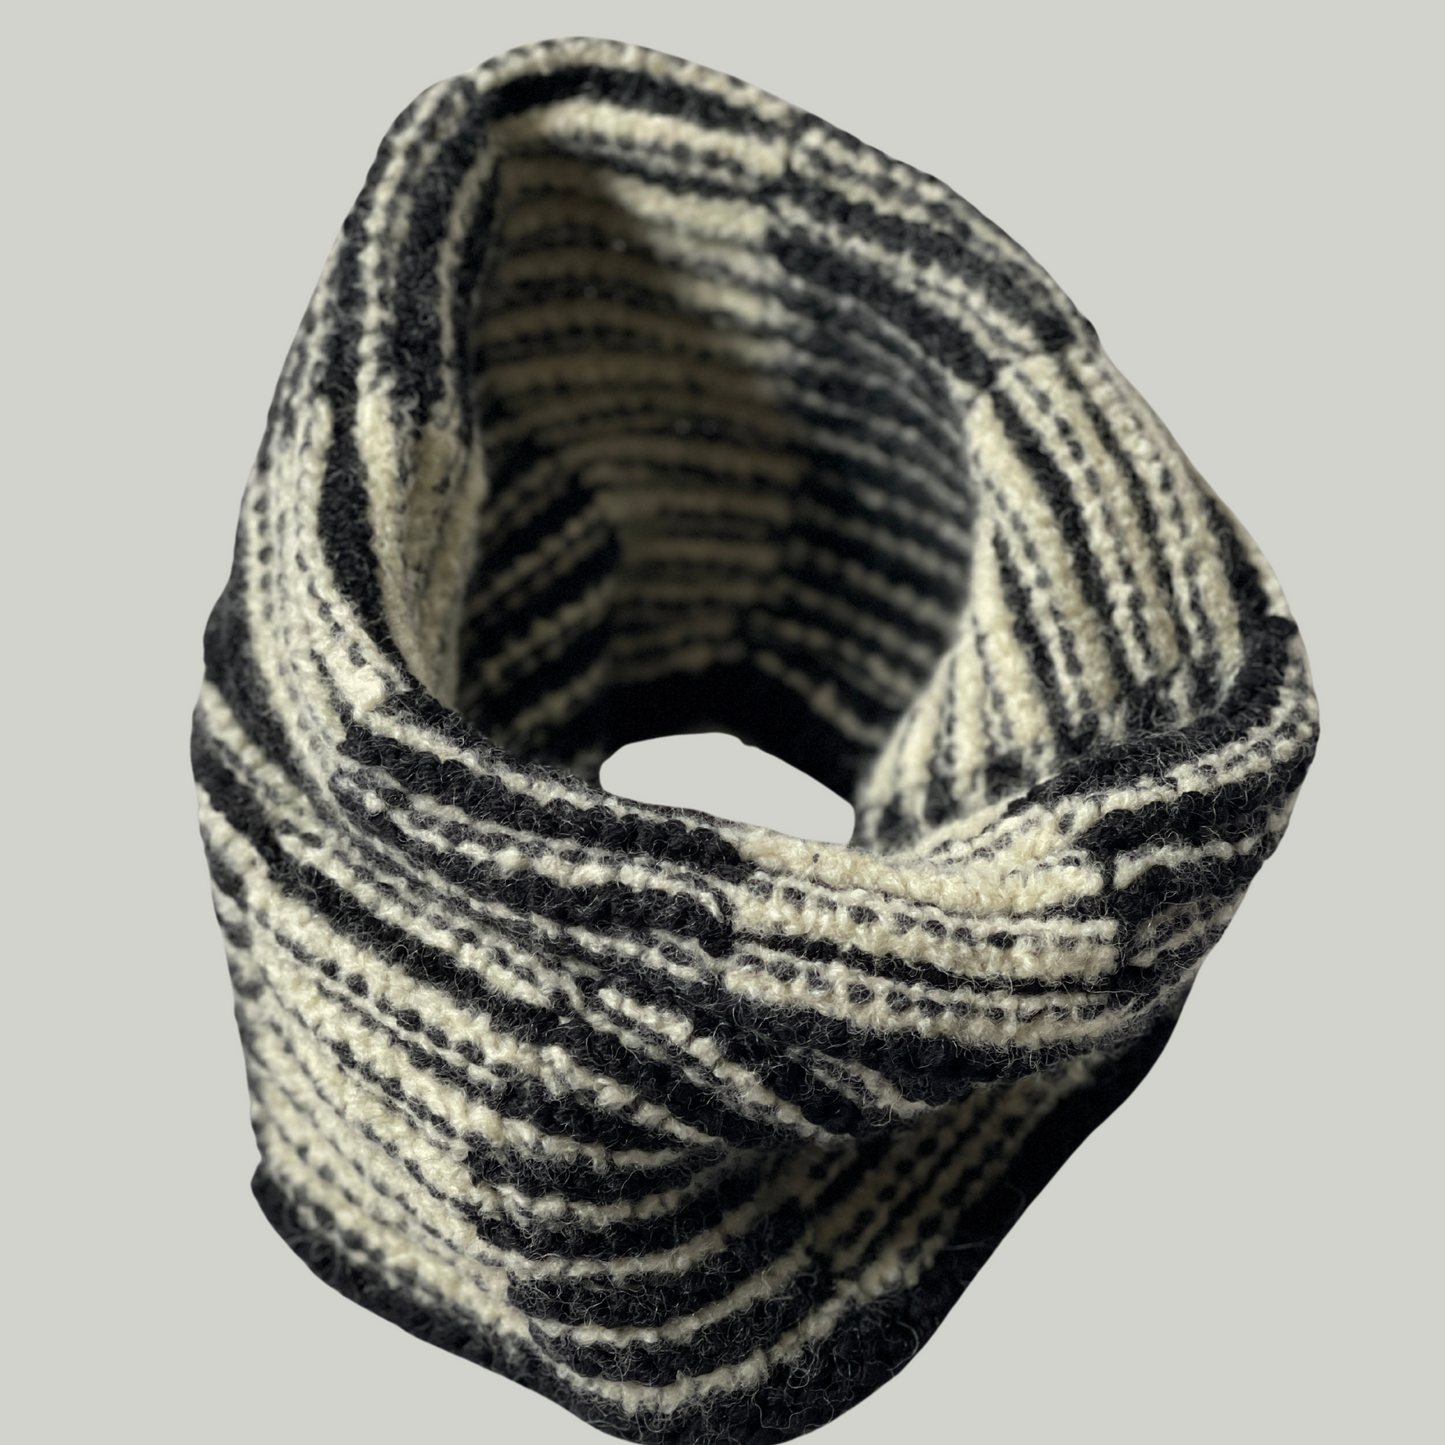 Black and White Wool/Acrylic Blend Contrast Cowl